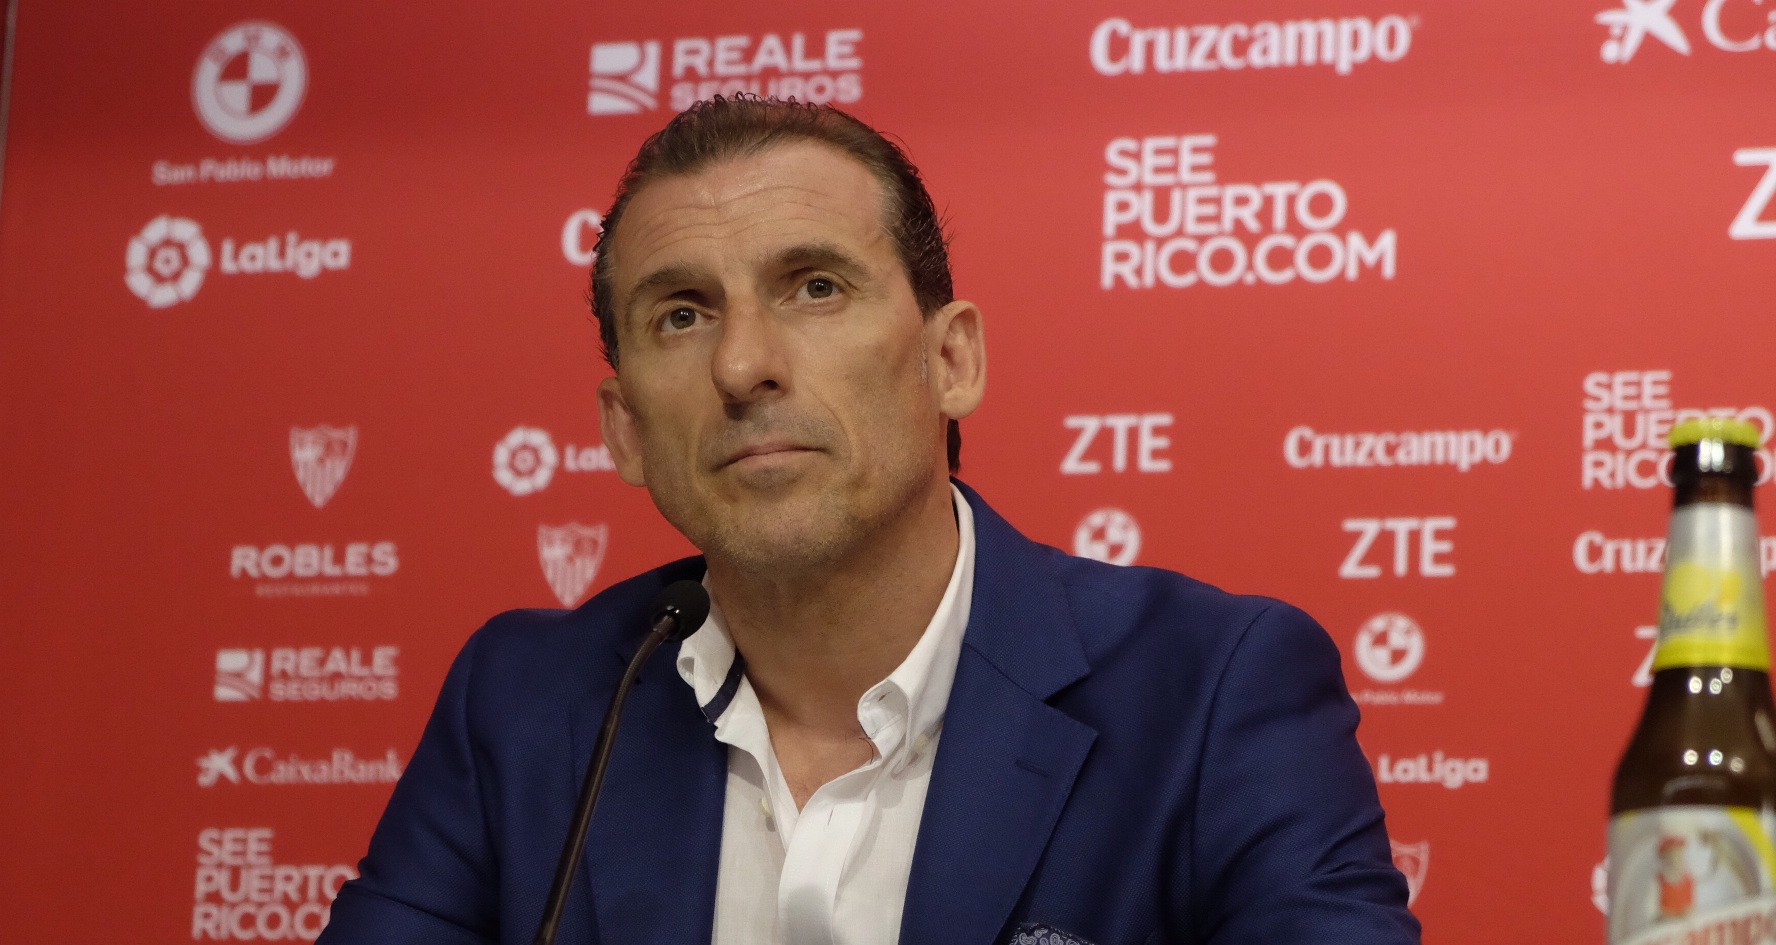 Óscar Arias is presented as Sevilla's new sporting director